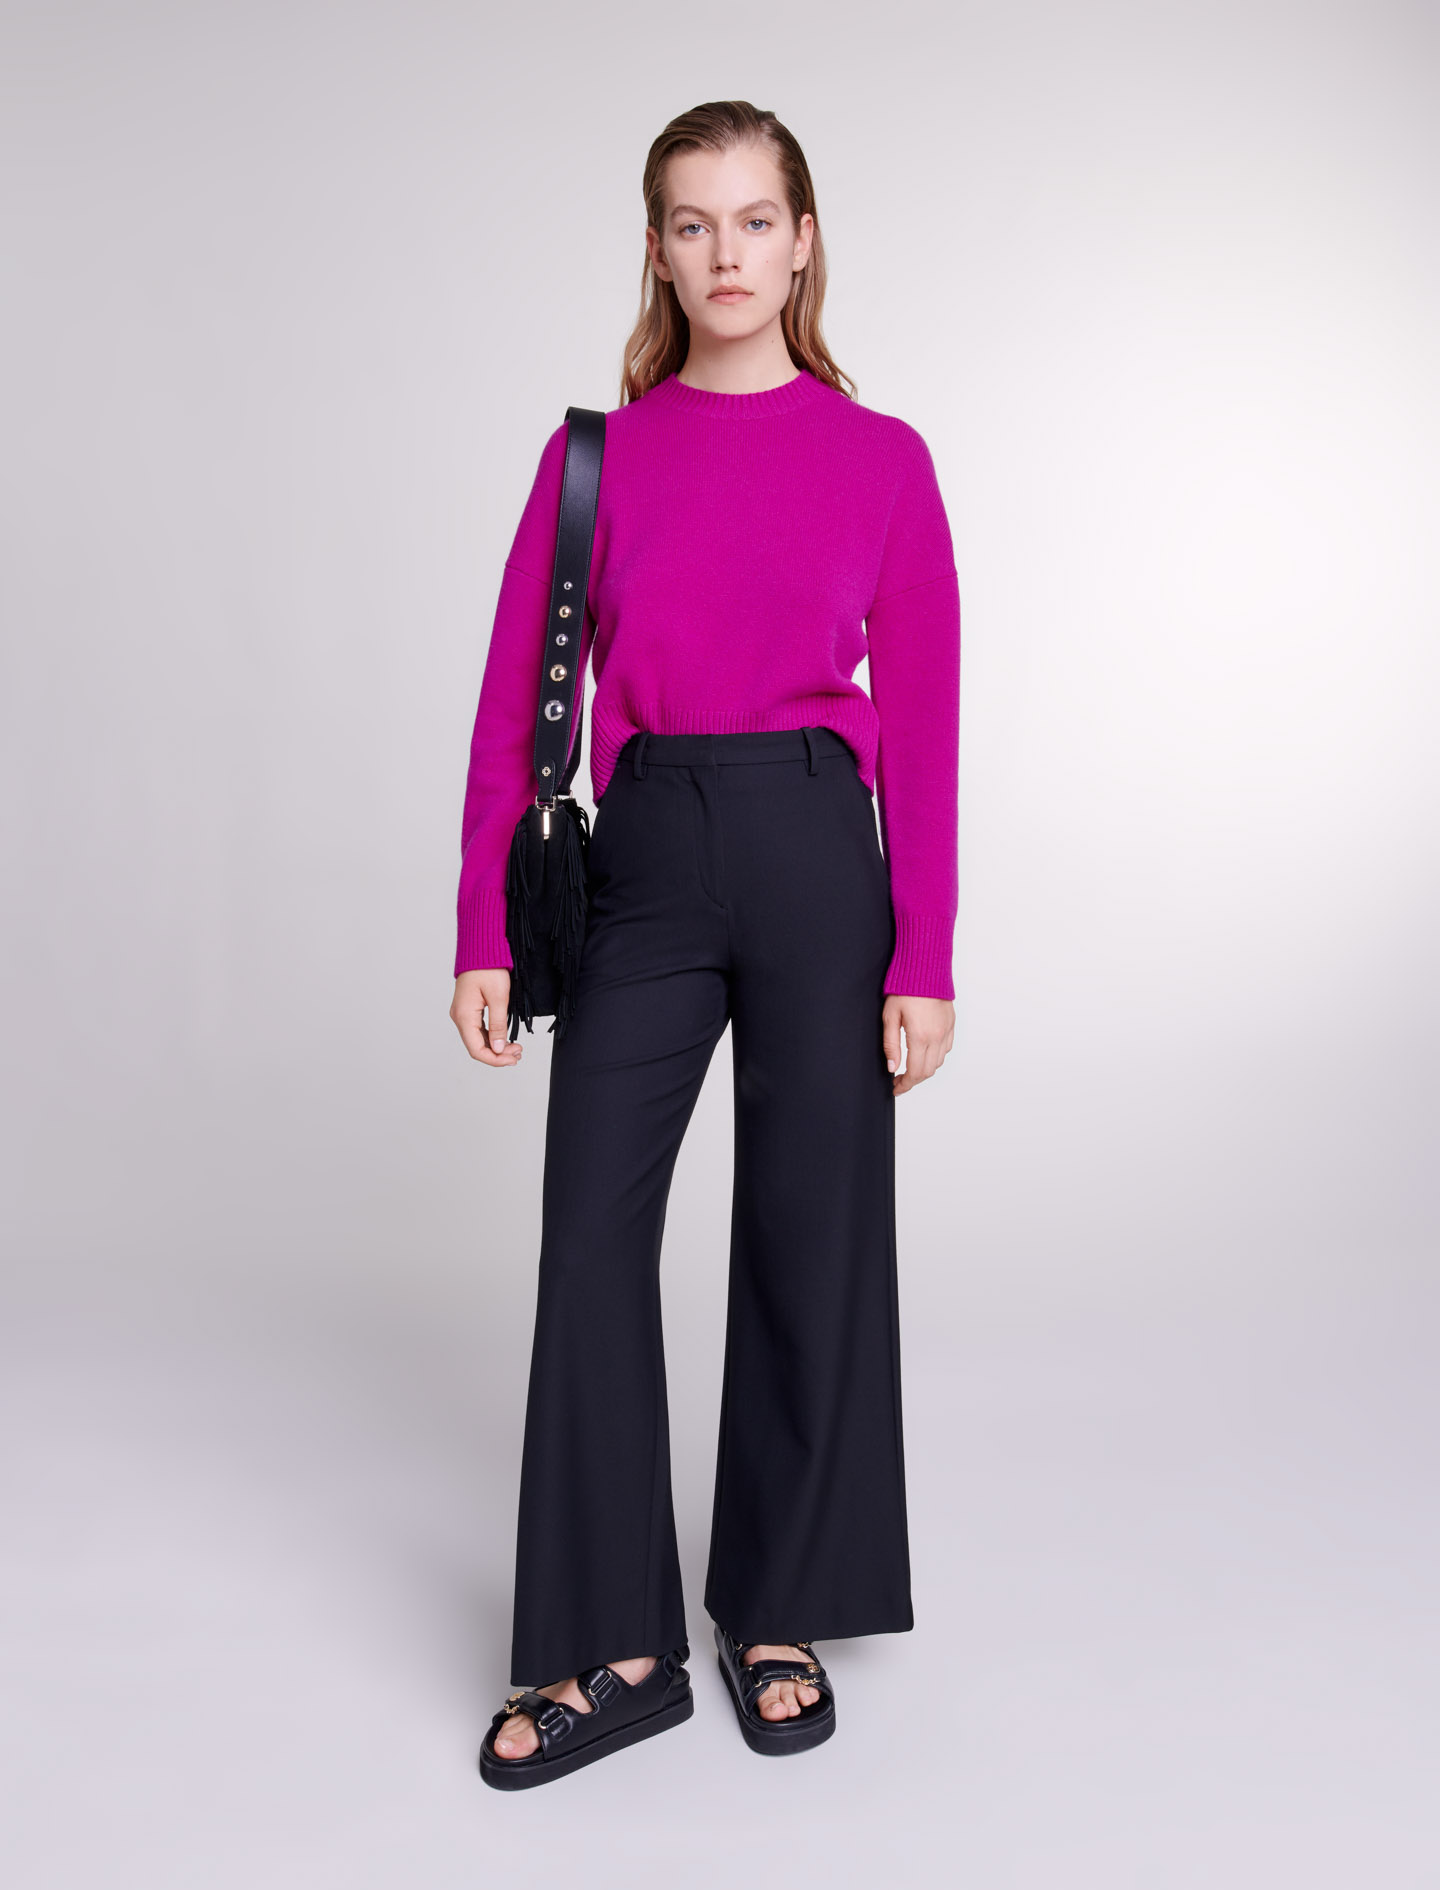 Maje Woman's polyester, Flared trousers for Spring/Summer, in color Black / Black